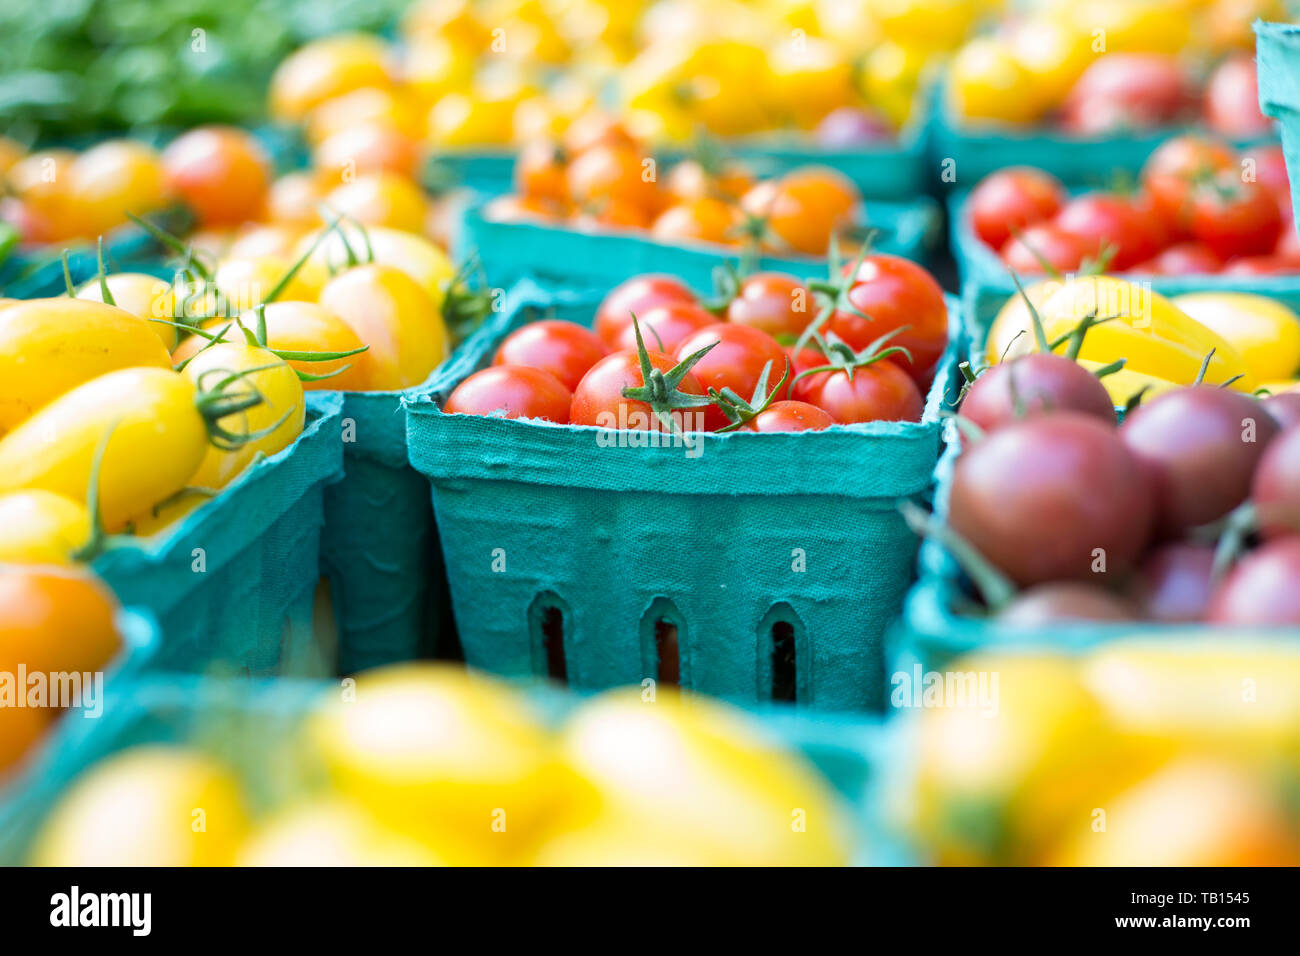 Containers of heirloom cherry tomatoes for sale at market. Stock Photo